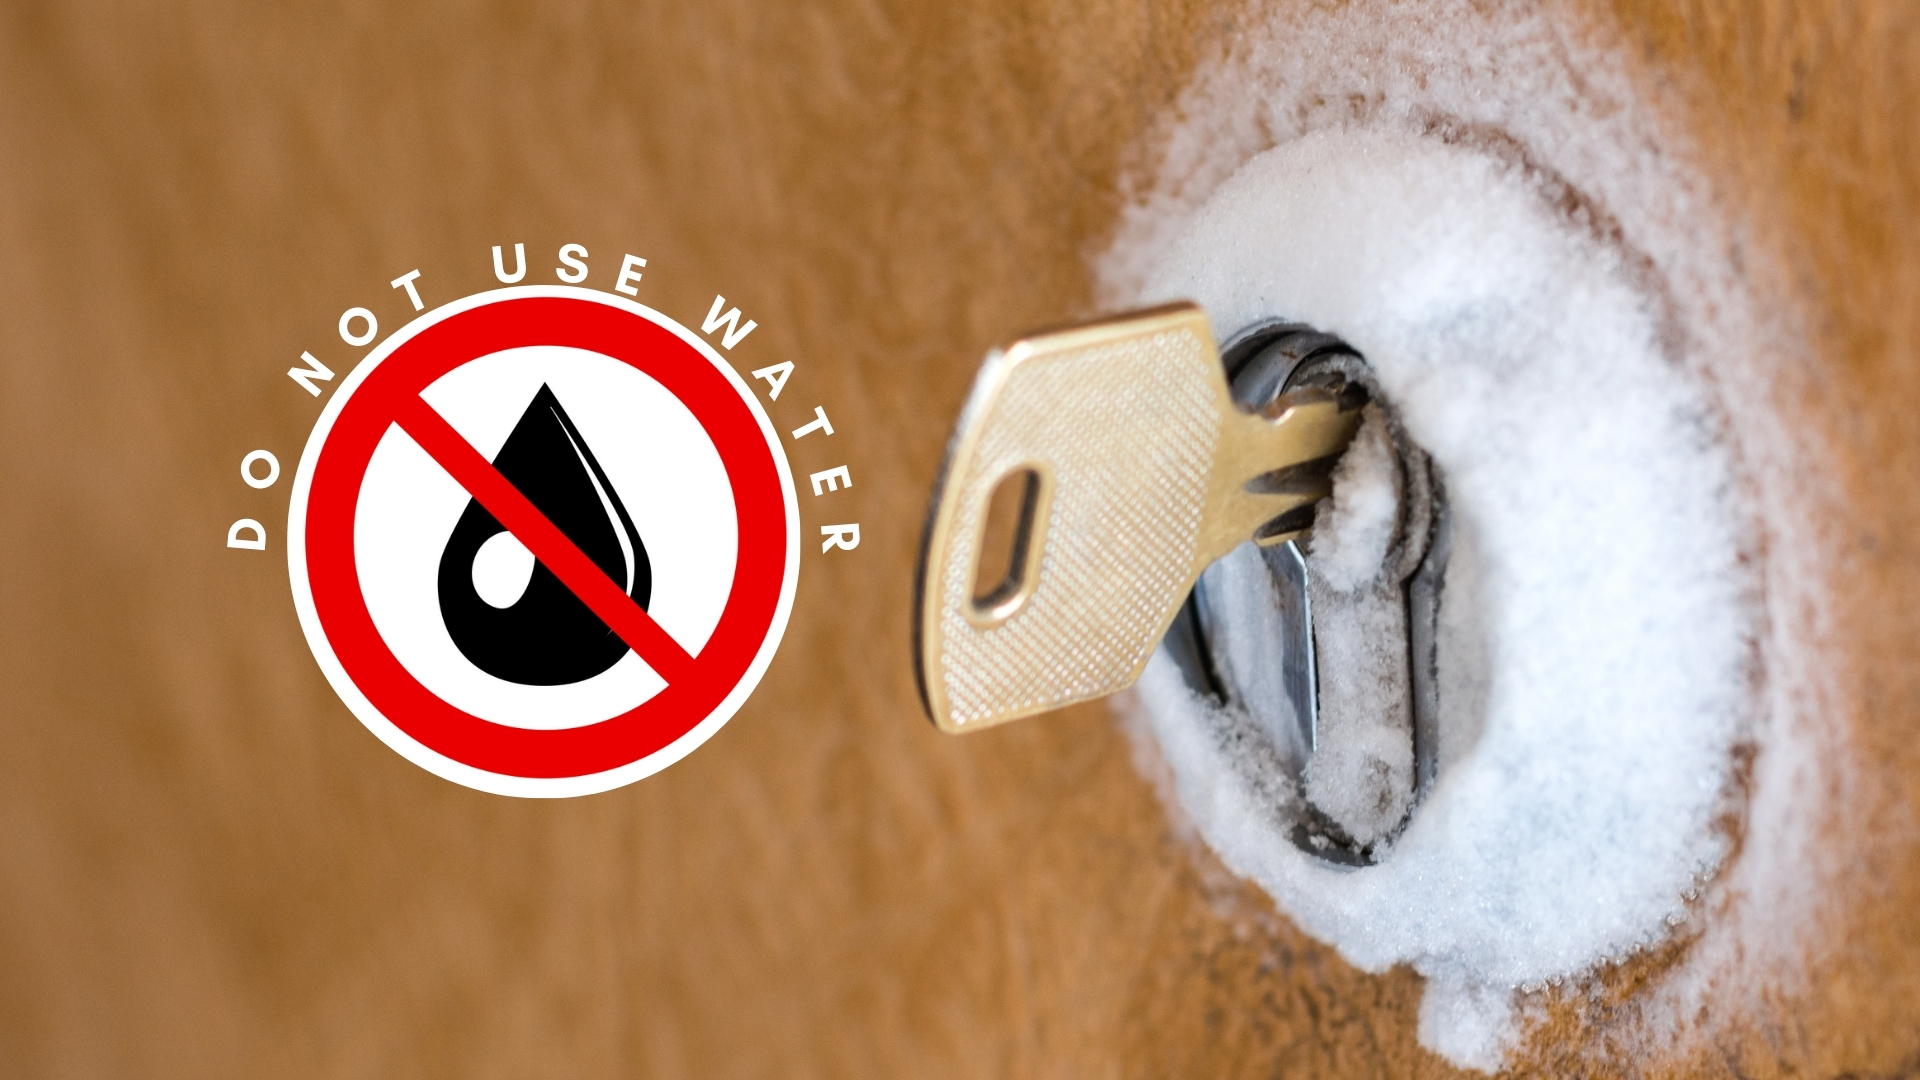 In cold weather, use a de-icing spray to thaw a frozen lock before applying a lock lubricant.